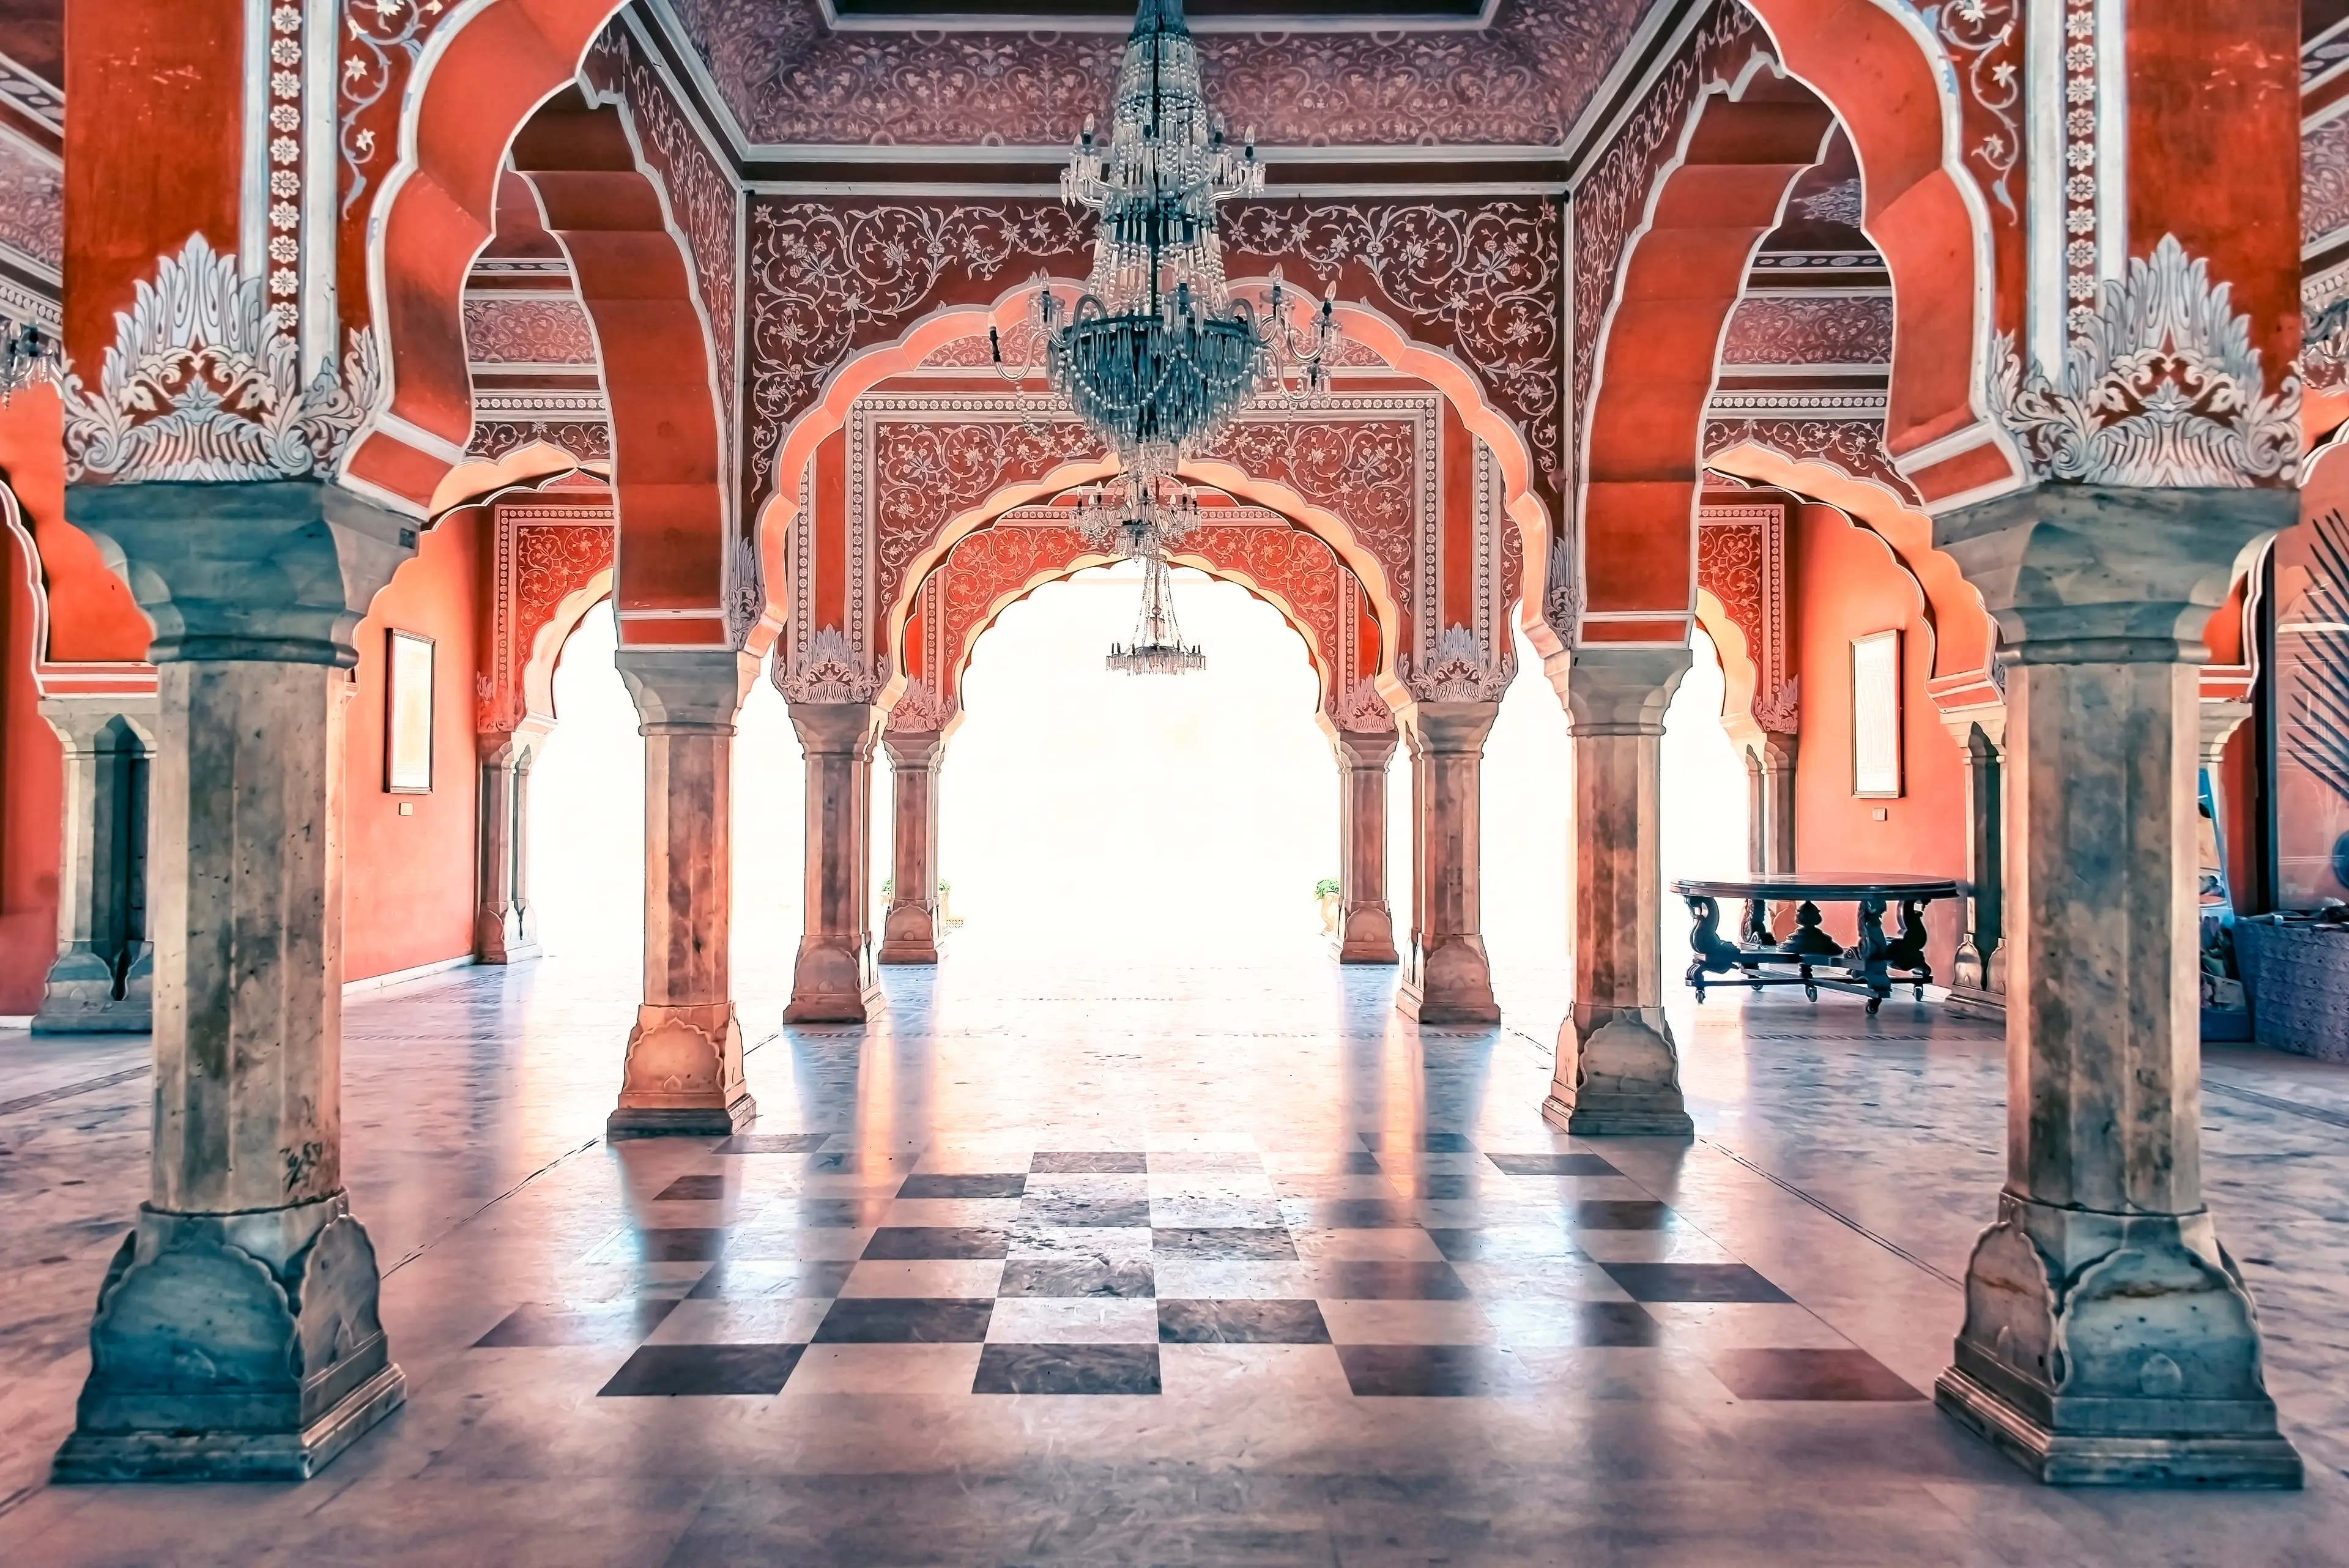 2-Day Solo Adventure and Sightseeing Itinerary in Jaipur, India